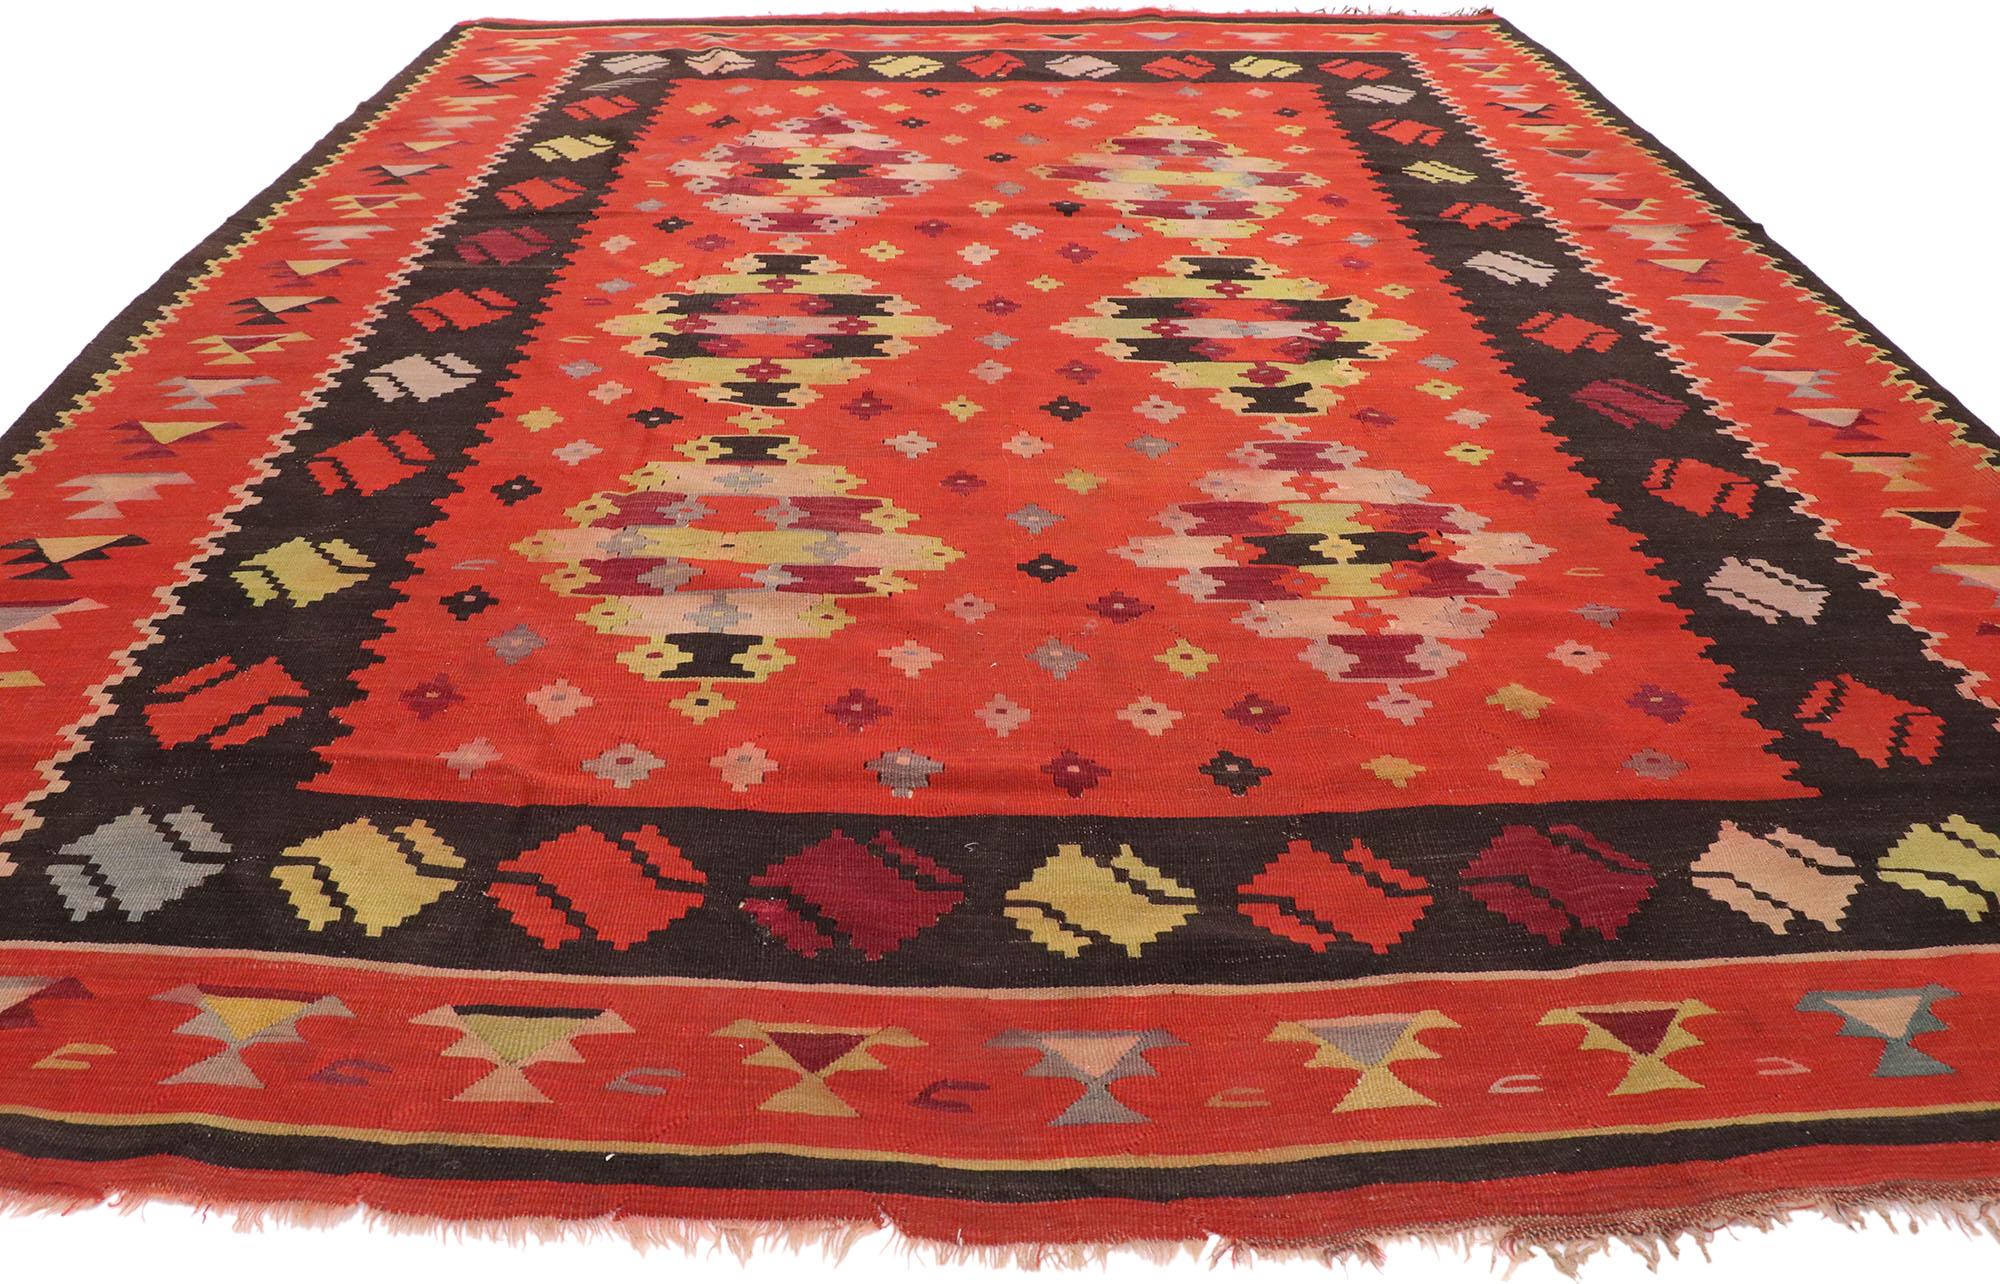 Hand-Woven Vintage Turkish Kilim Rug with Navajo Adirondack Design and Two Grey Hills Style For Sale